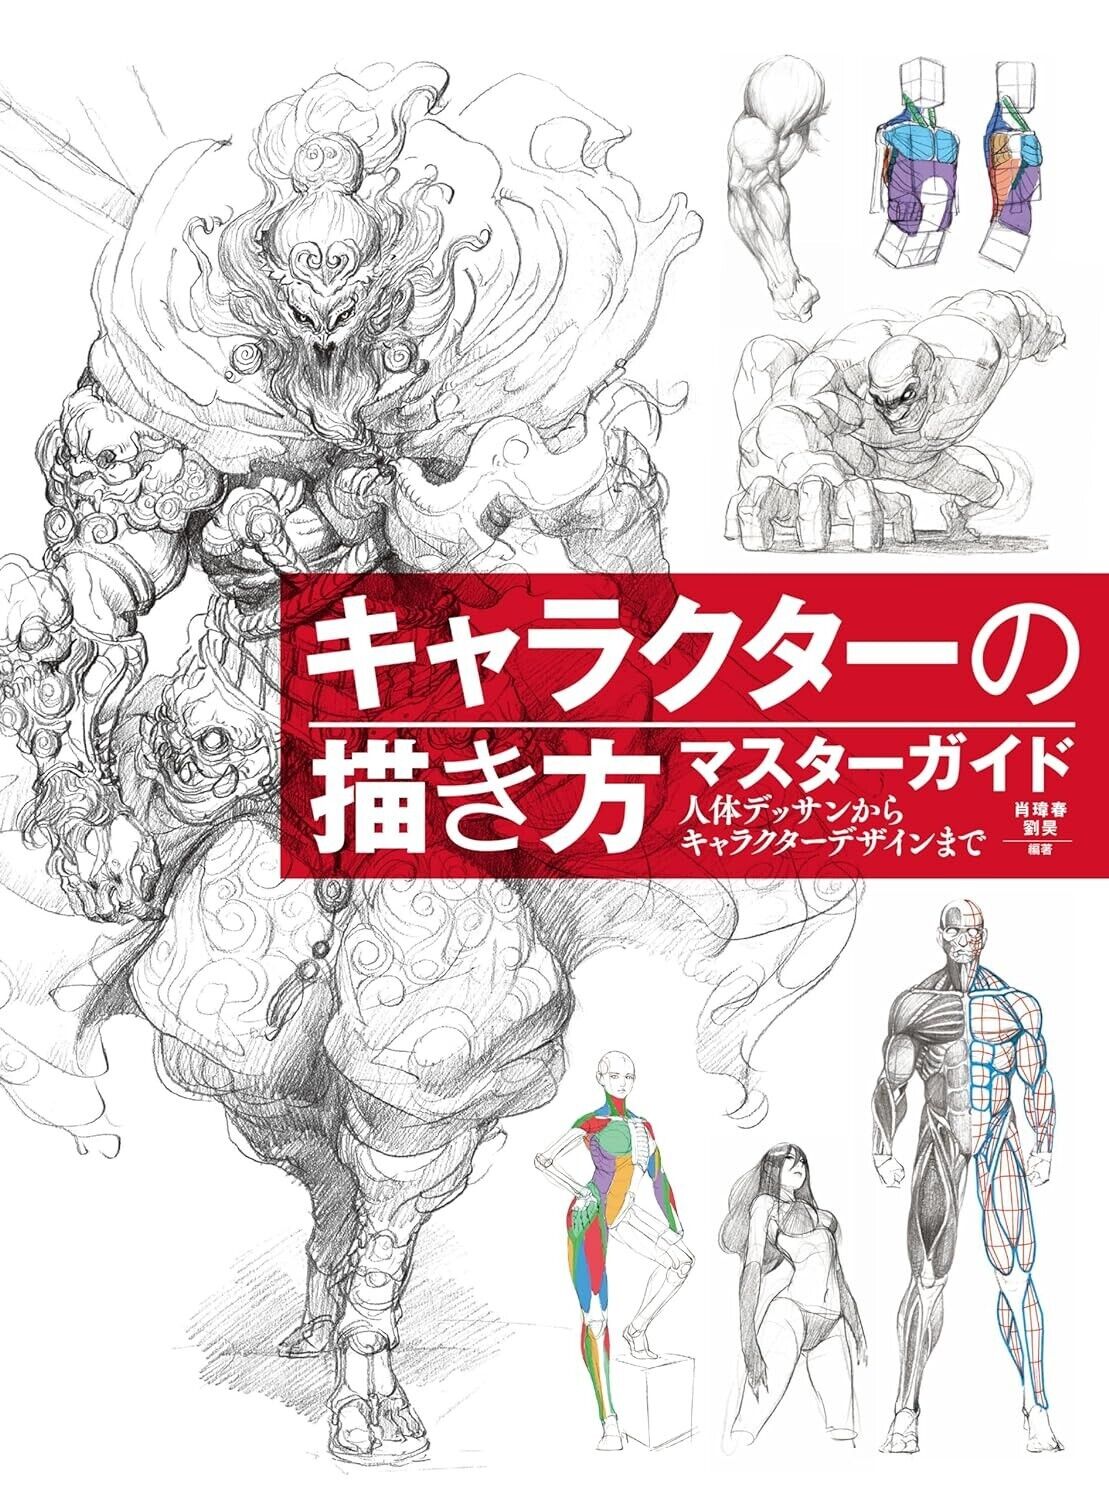 How To Draw Characters Master Guide  | JAPAN Book Manga Illustration Art